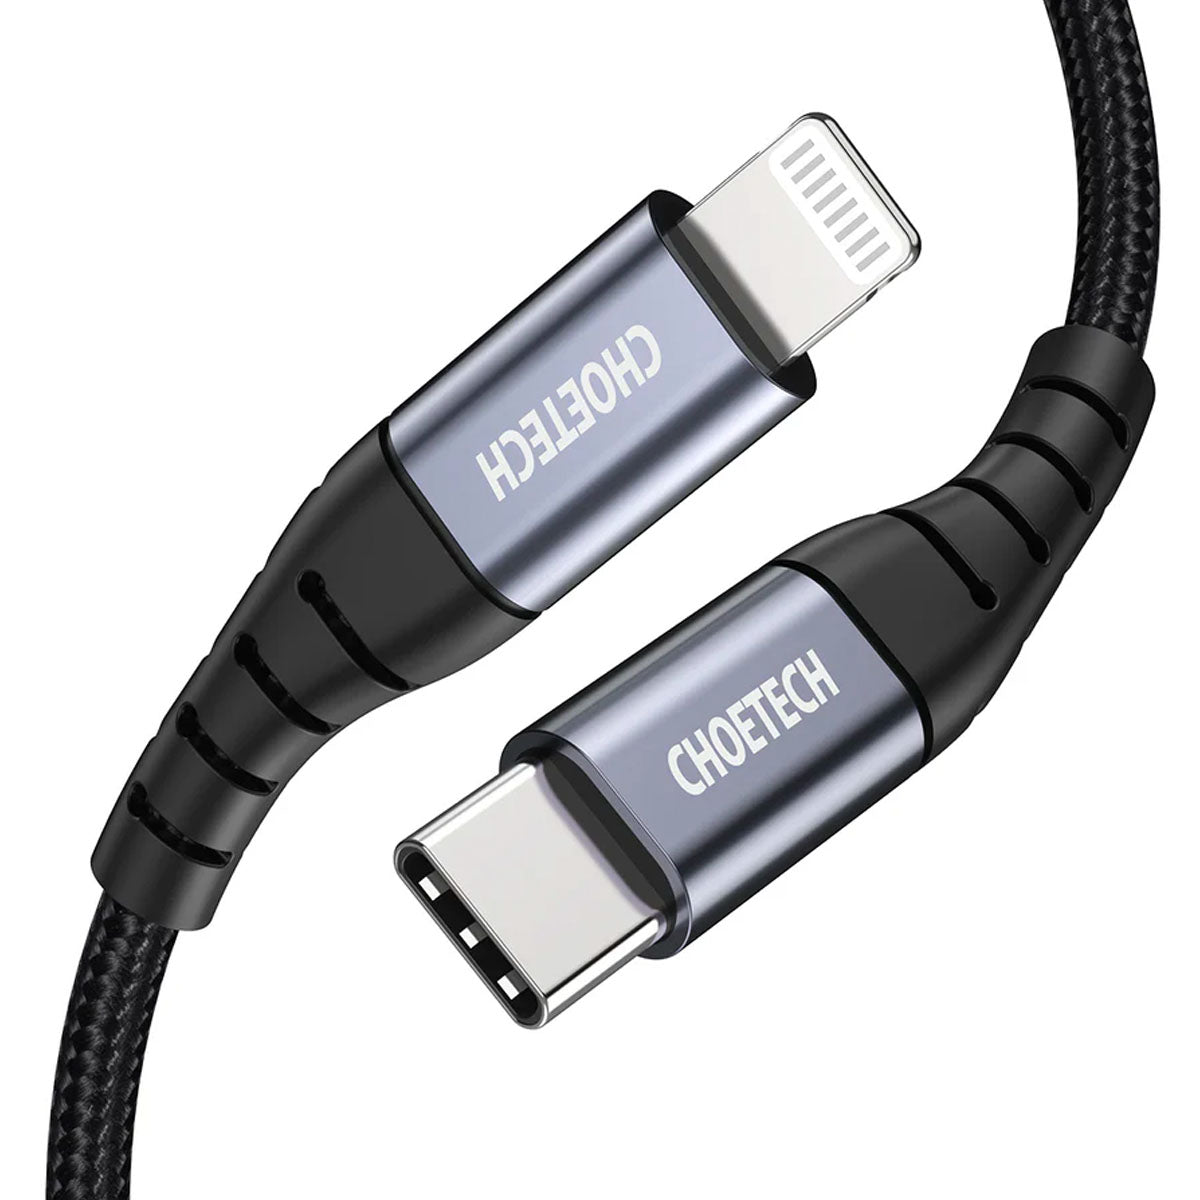 Choetech Type C to Lightning Cable (2m)